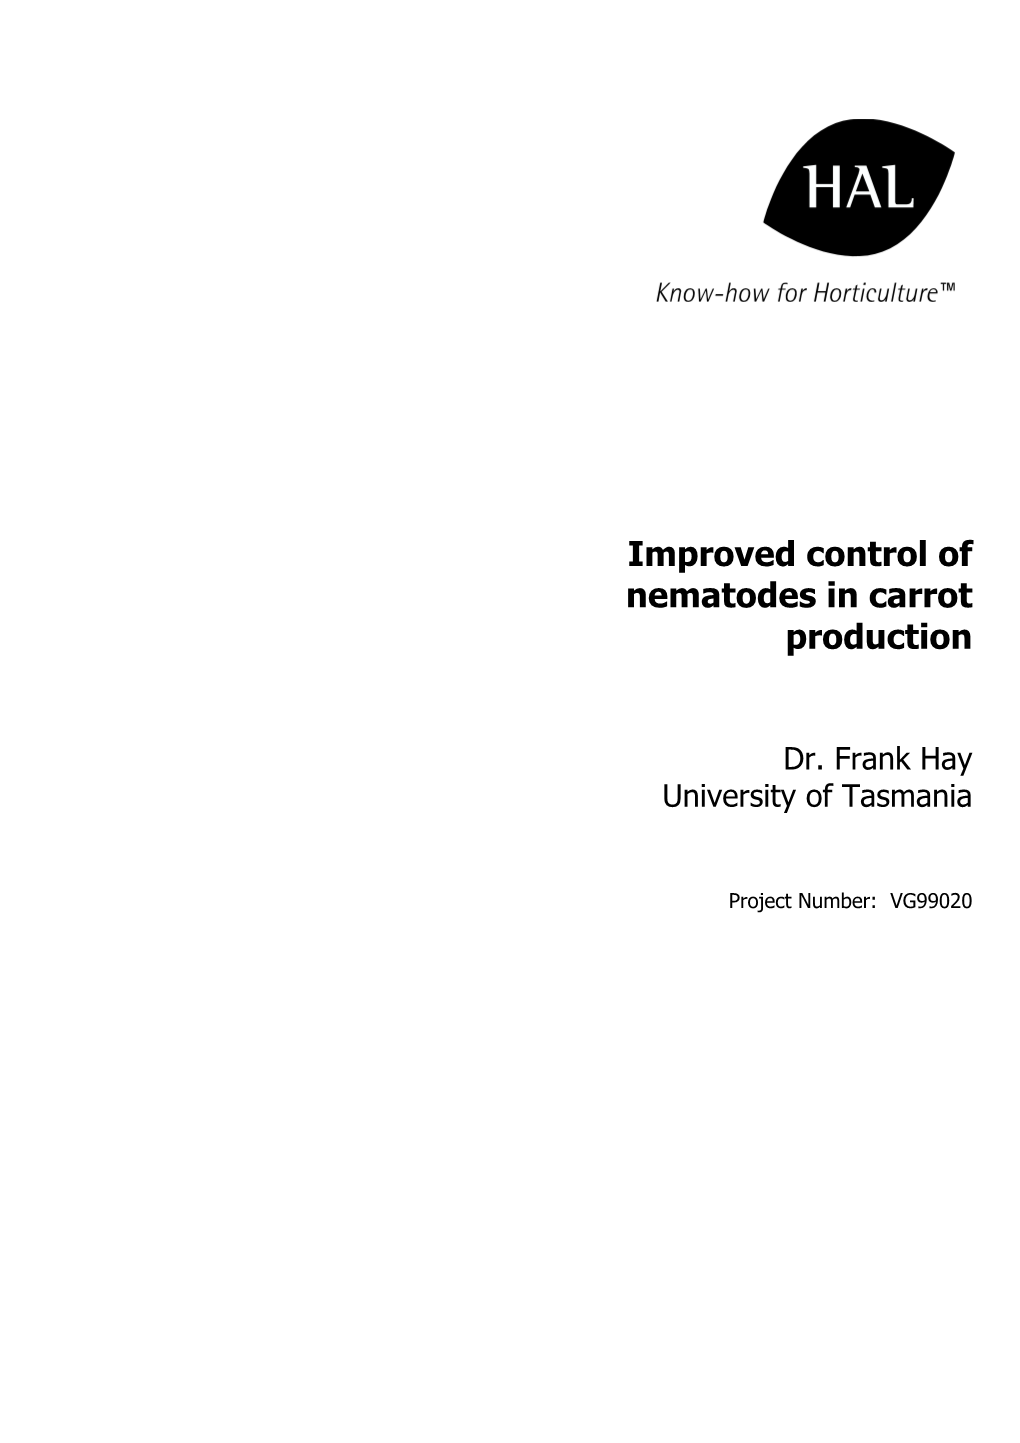 Improved Control of Nematodes in Carrot Production